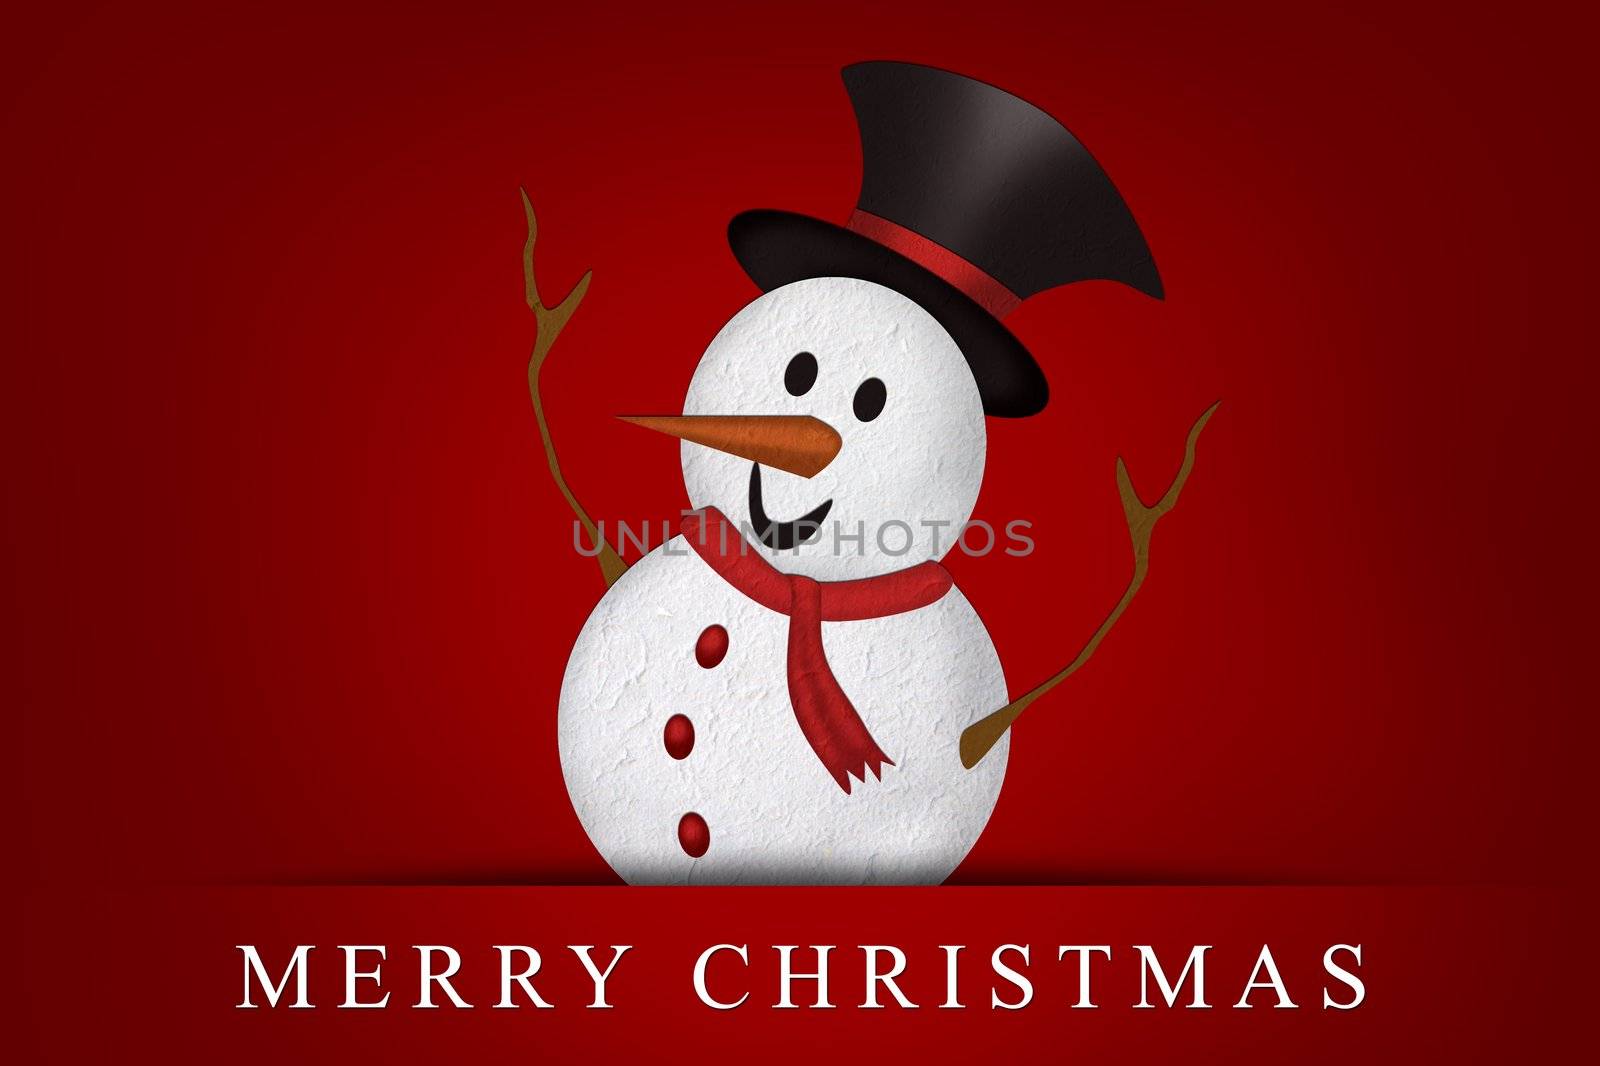 Merry Christmas, Mulberry paper Christmas Snowman and red background.